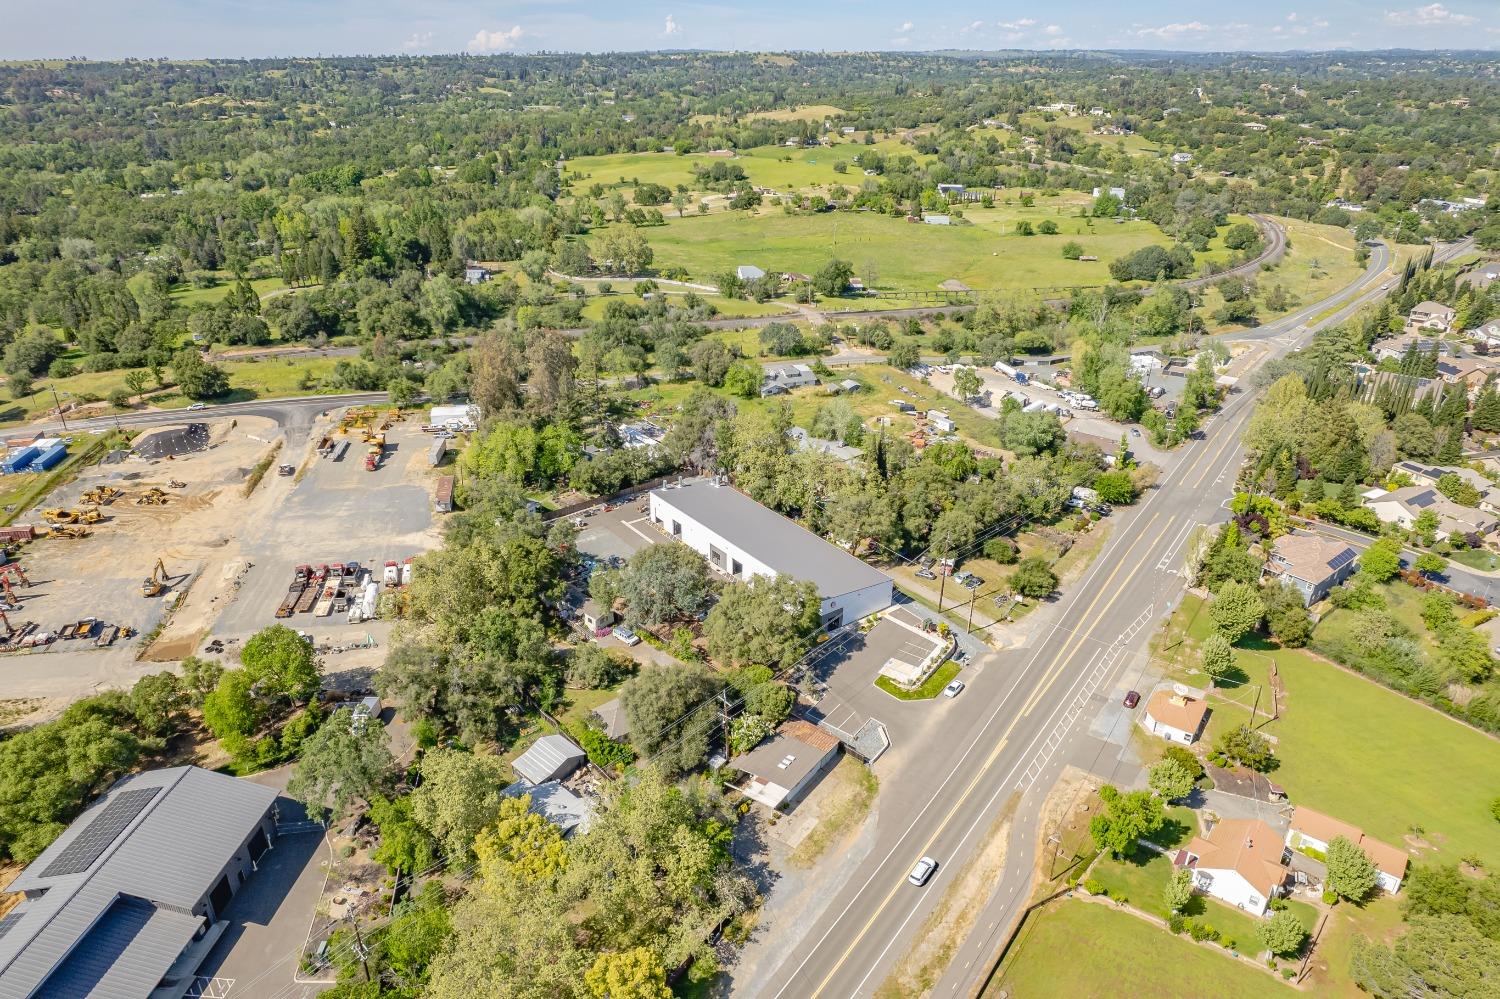 Photo of 3244 Taylor Rd in Loomis, CA